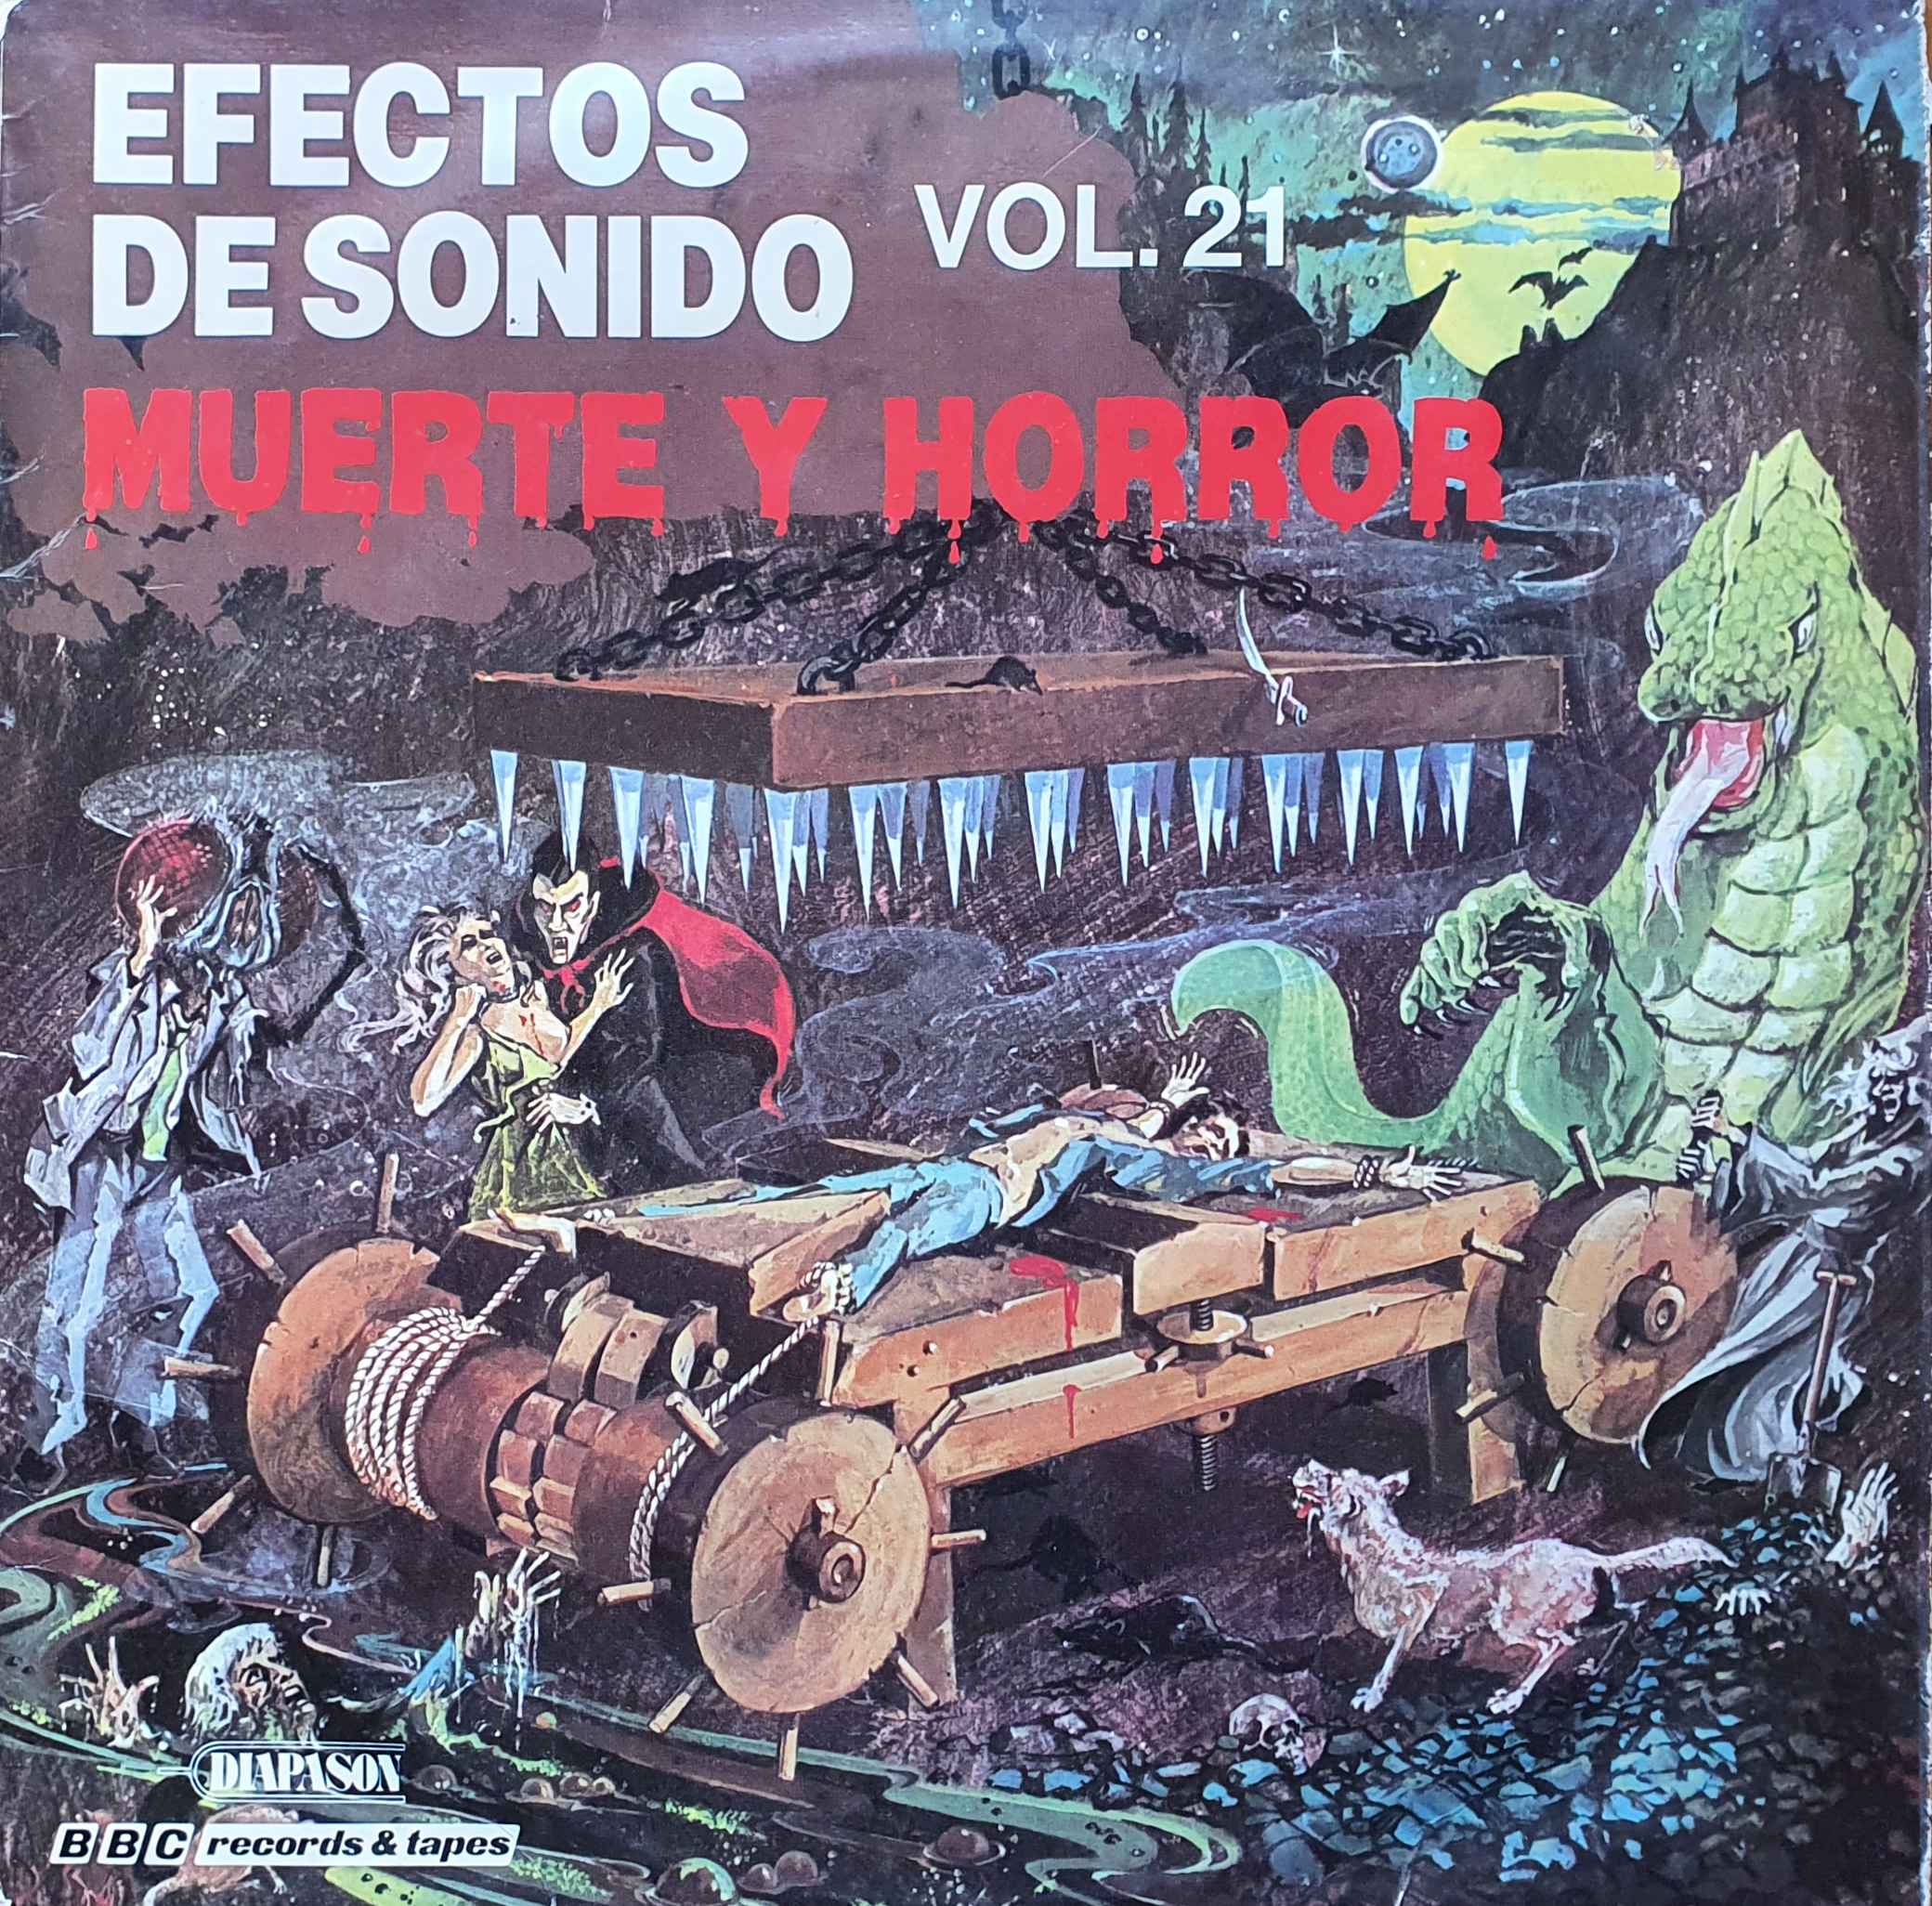 Picture of 51.0125 Efectos de sonido Vol. 21 - Muerte Y Horror by artist Various from the BBC albums - Records and Tapes library